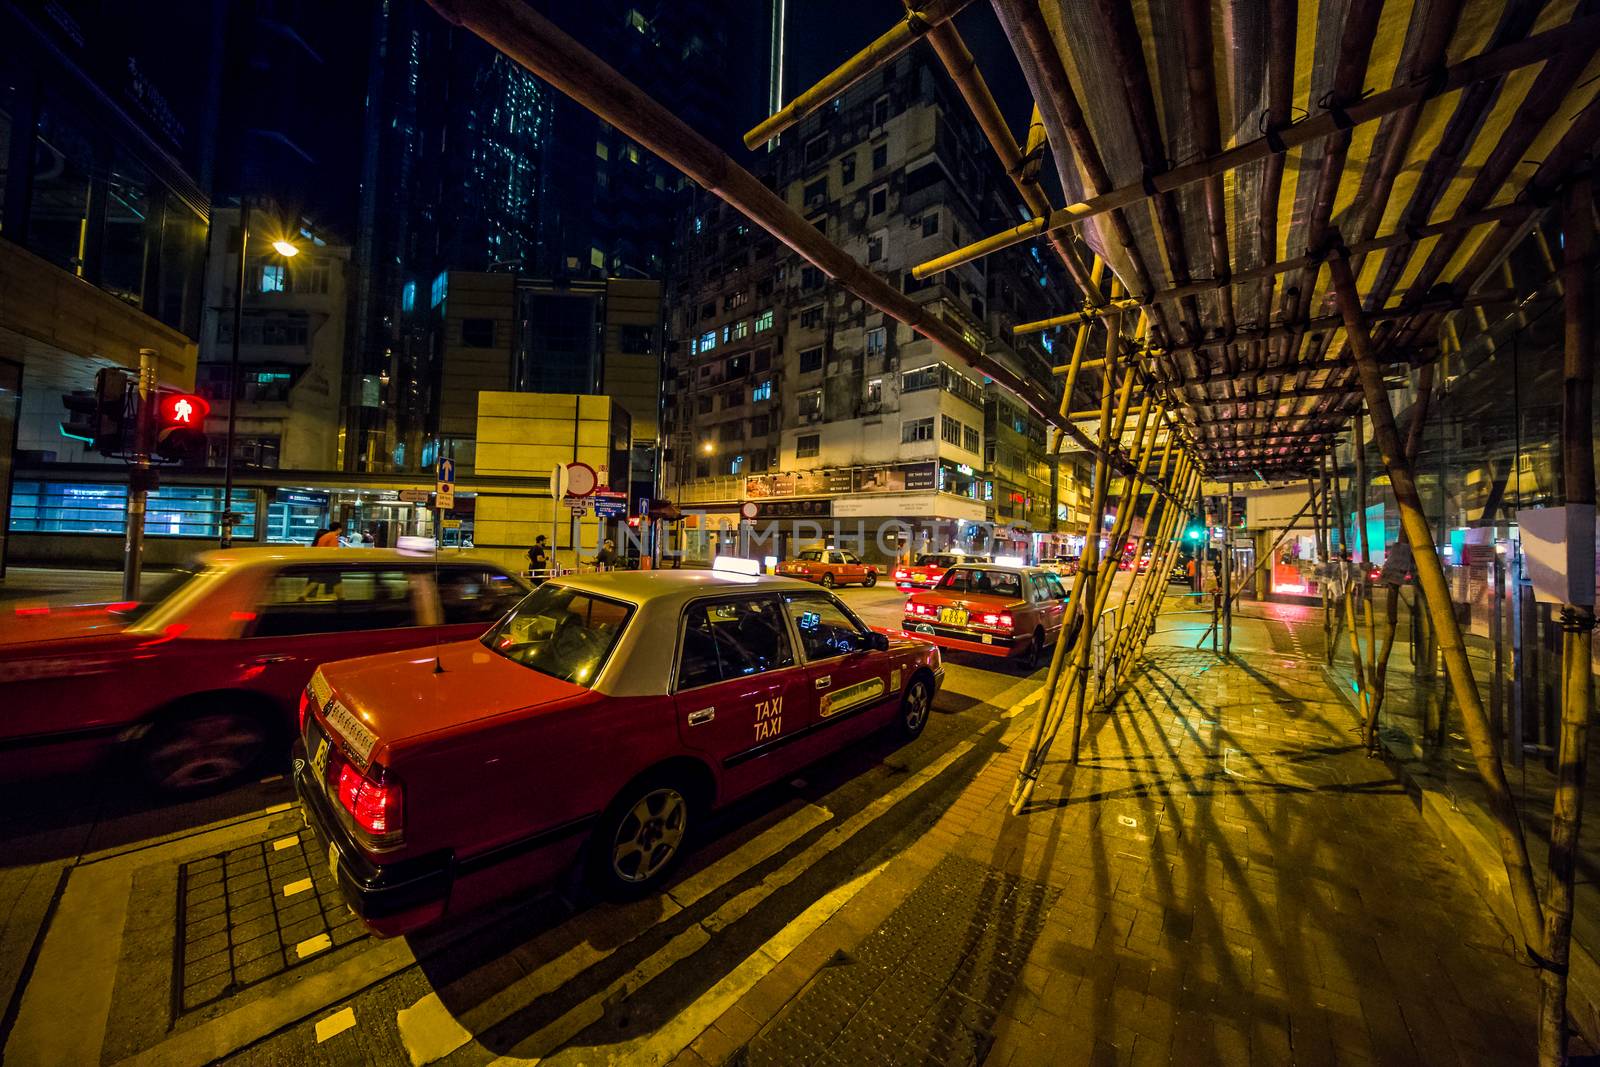 Red taxis at late night at an intersection in Hong Kong by Obmeetsworld